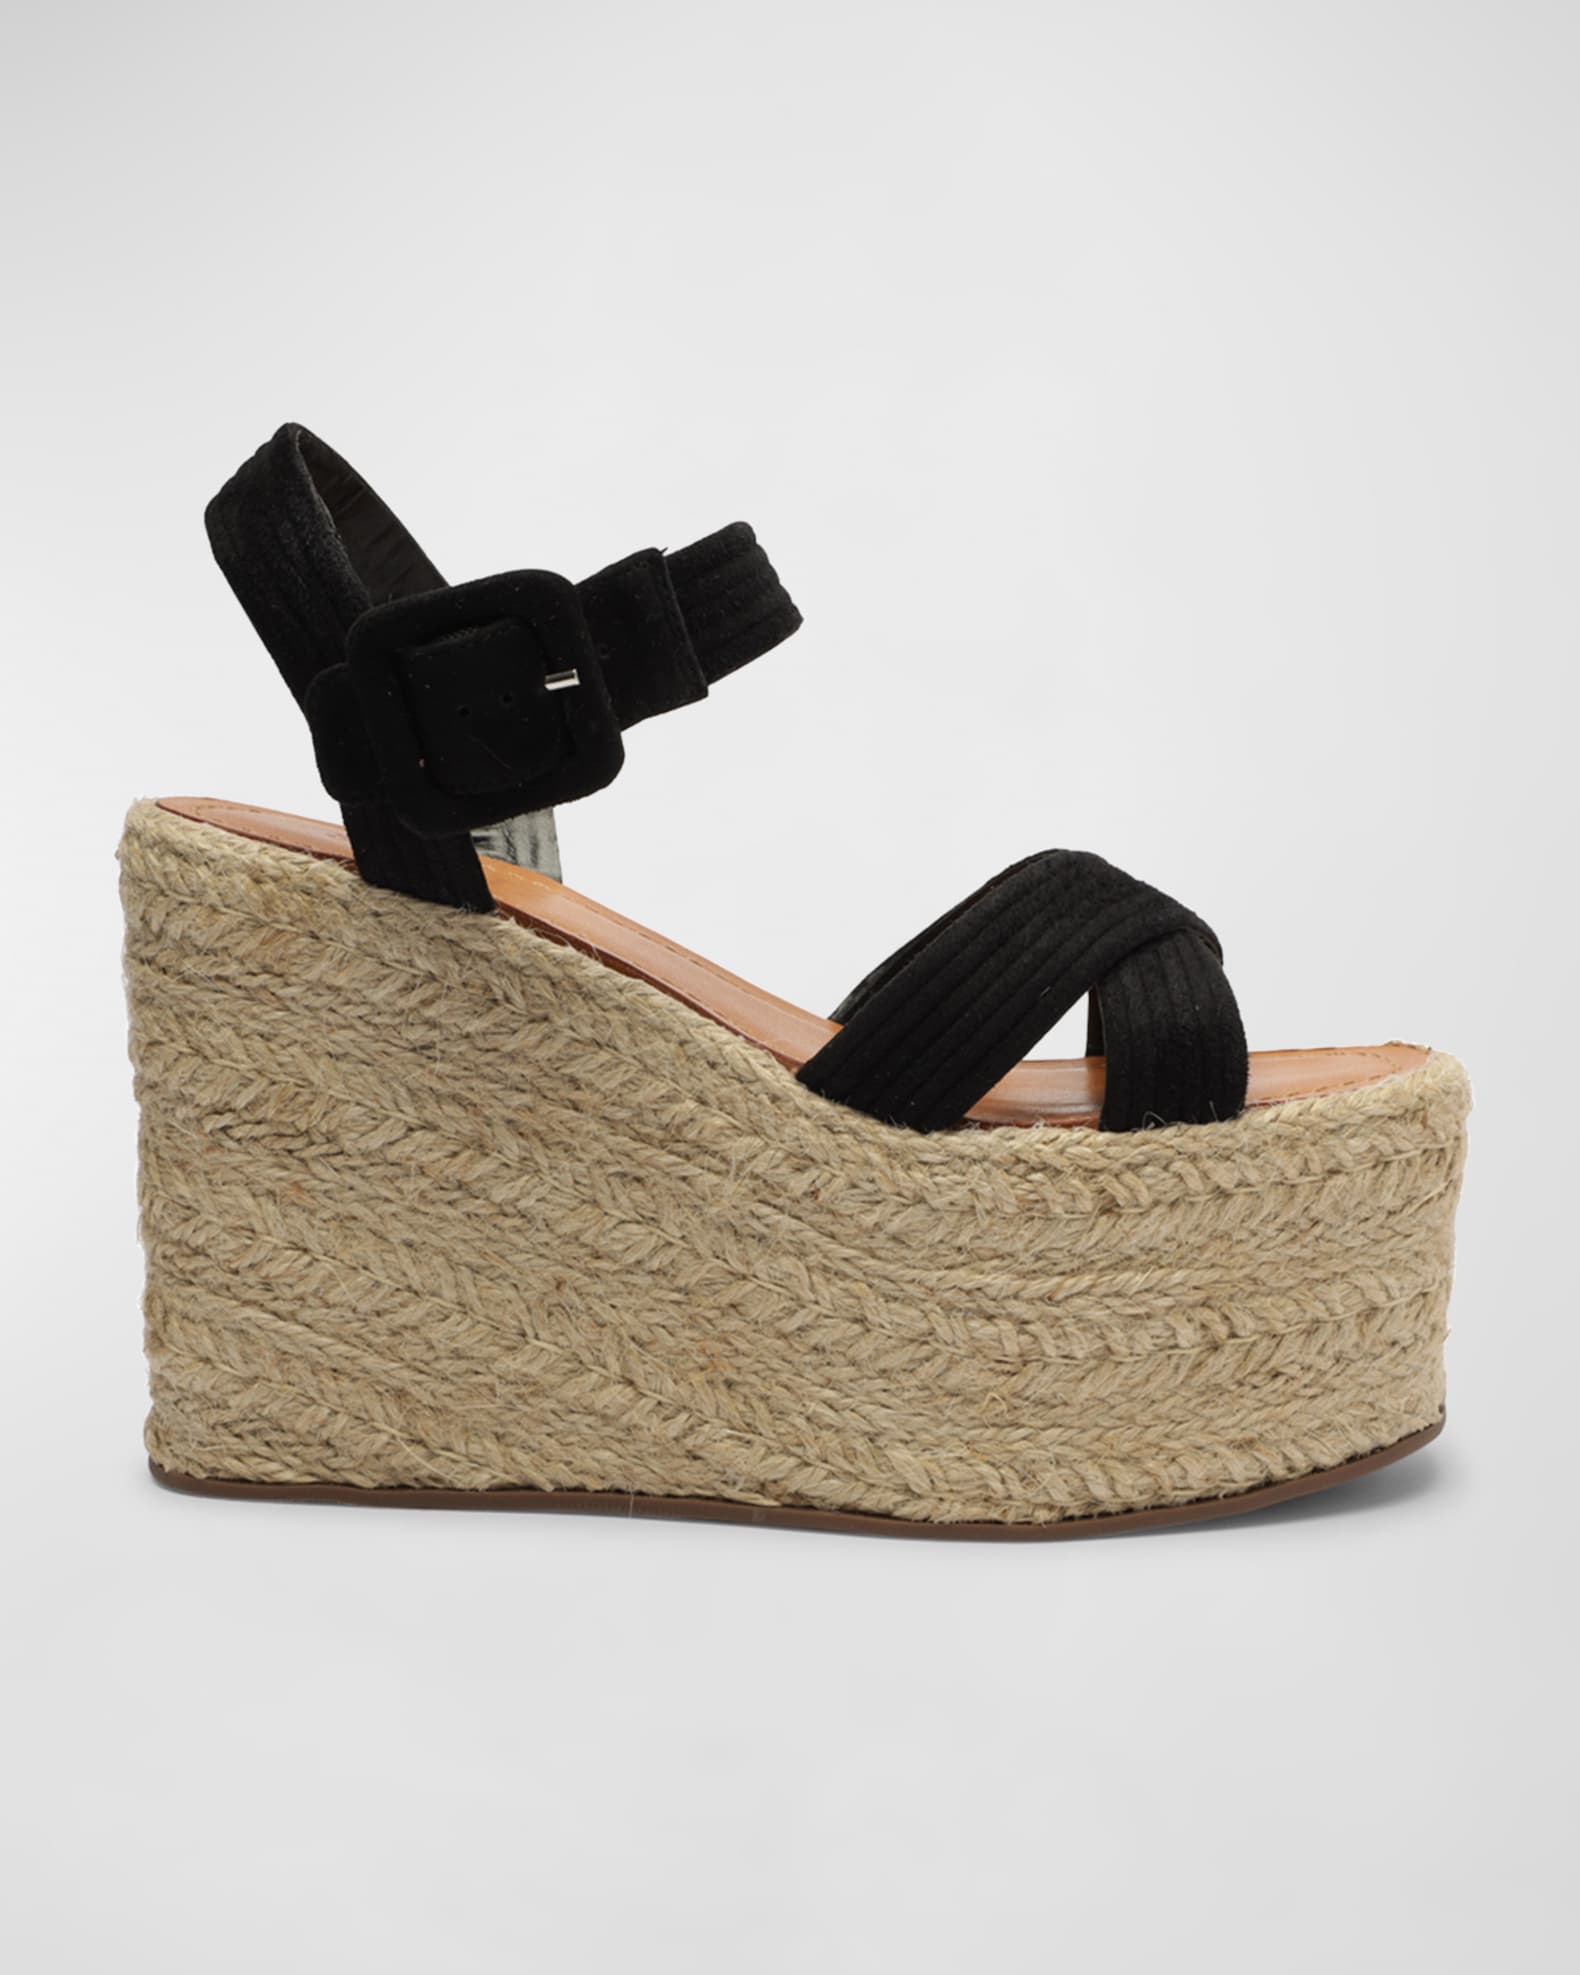 Red 95 canvas wrap espadrille wedge sandals, Gucci